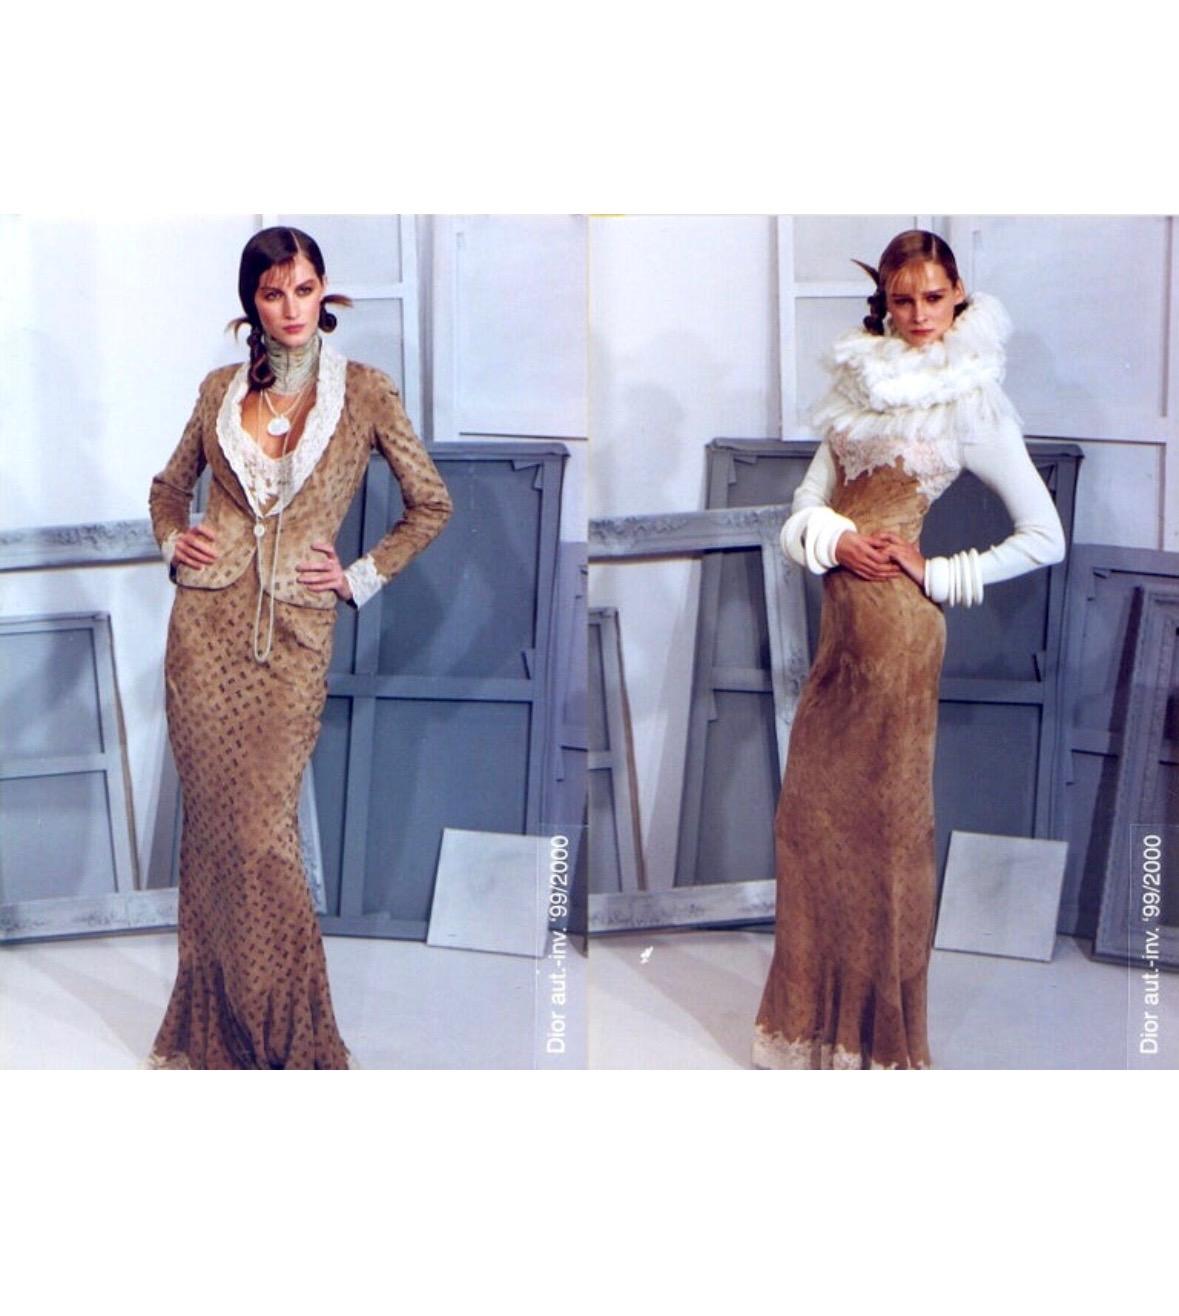 F/W 1999 Christian Dior by John Galliano Runway Laser-Cut Suede Turtleneck Gown For Sale 1